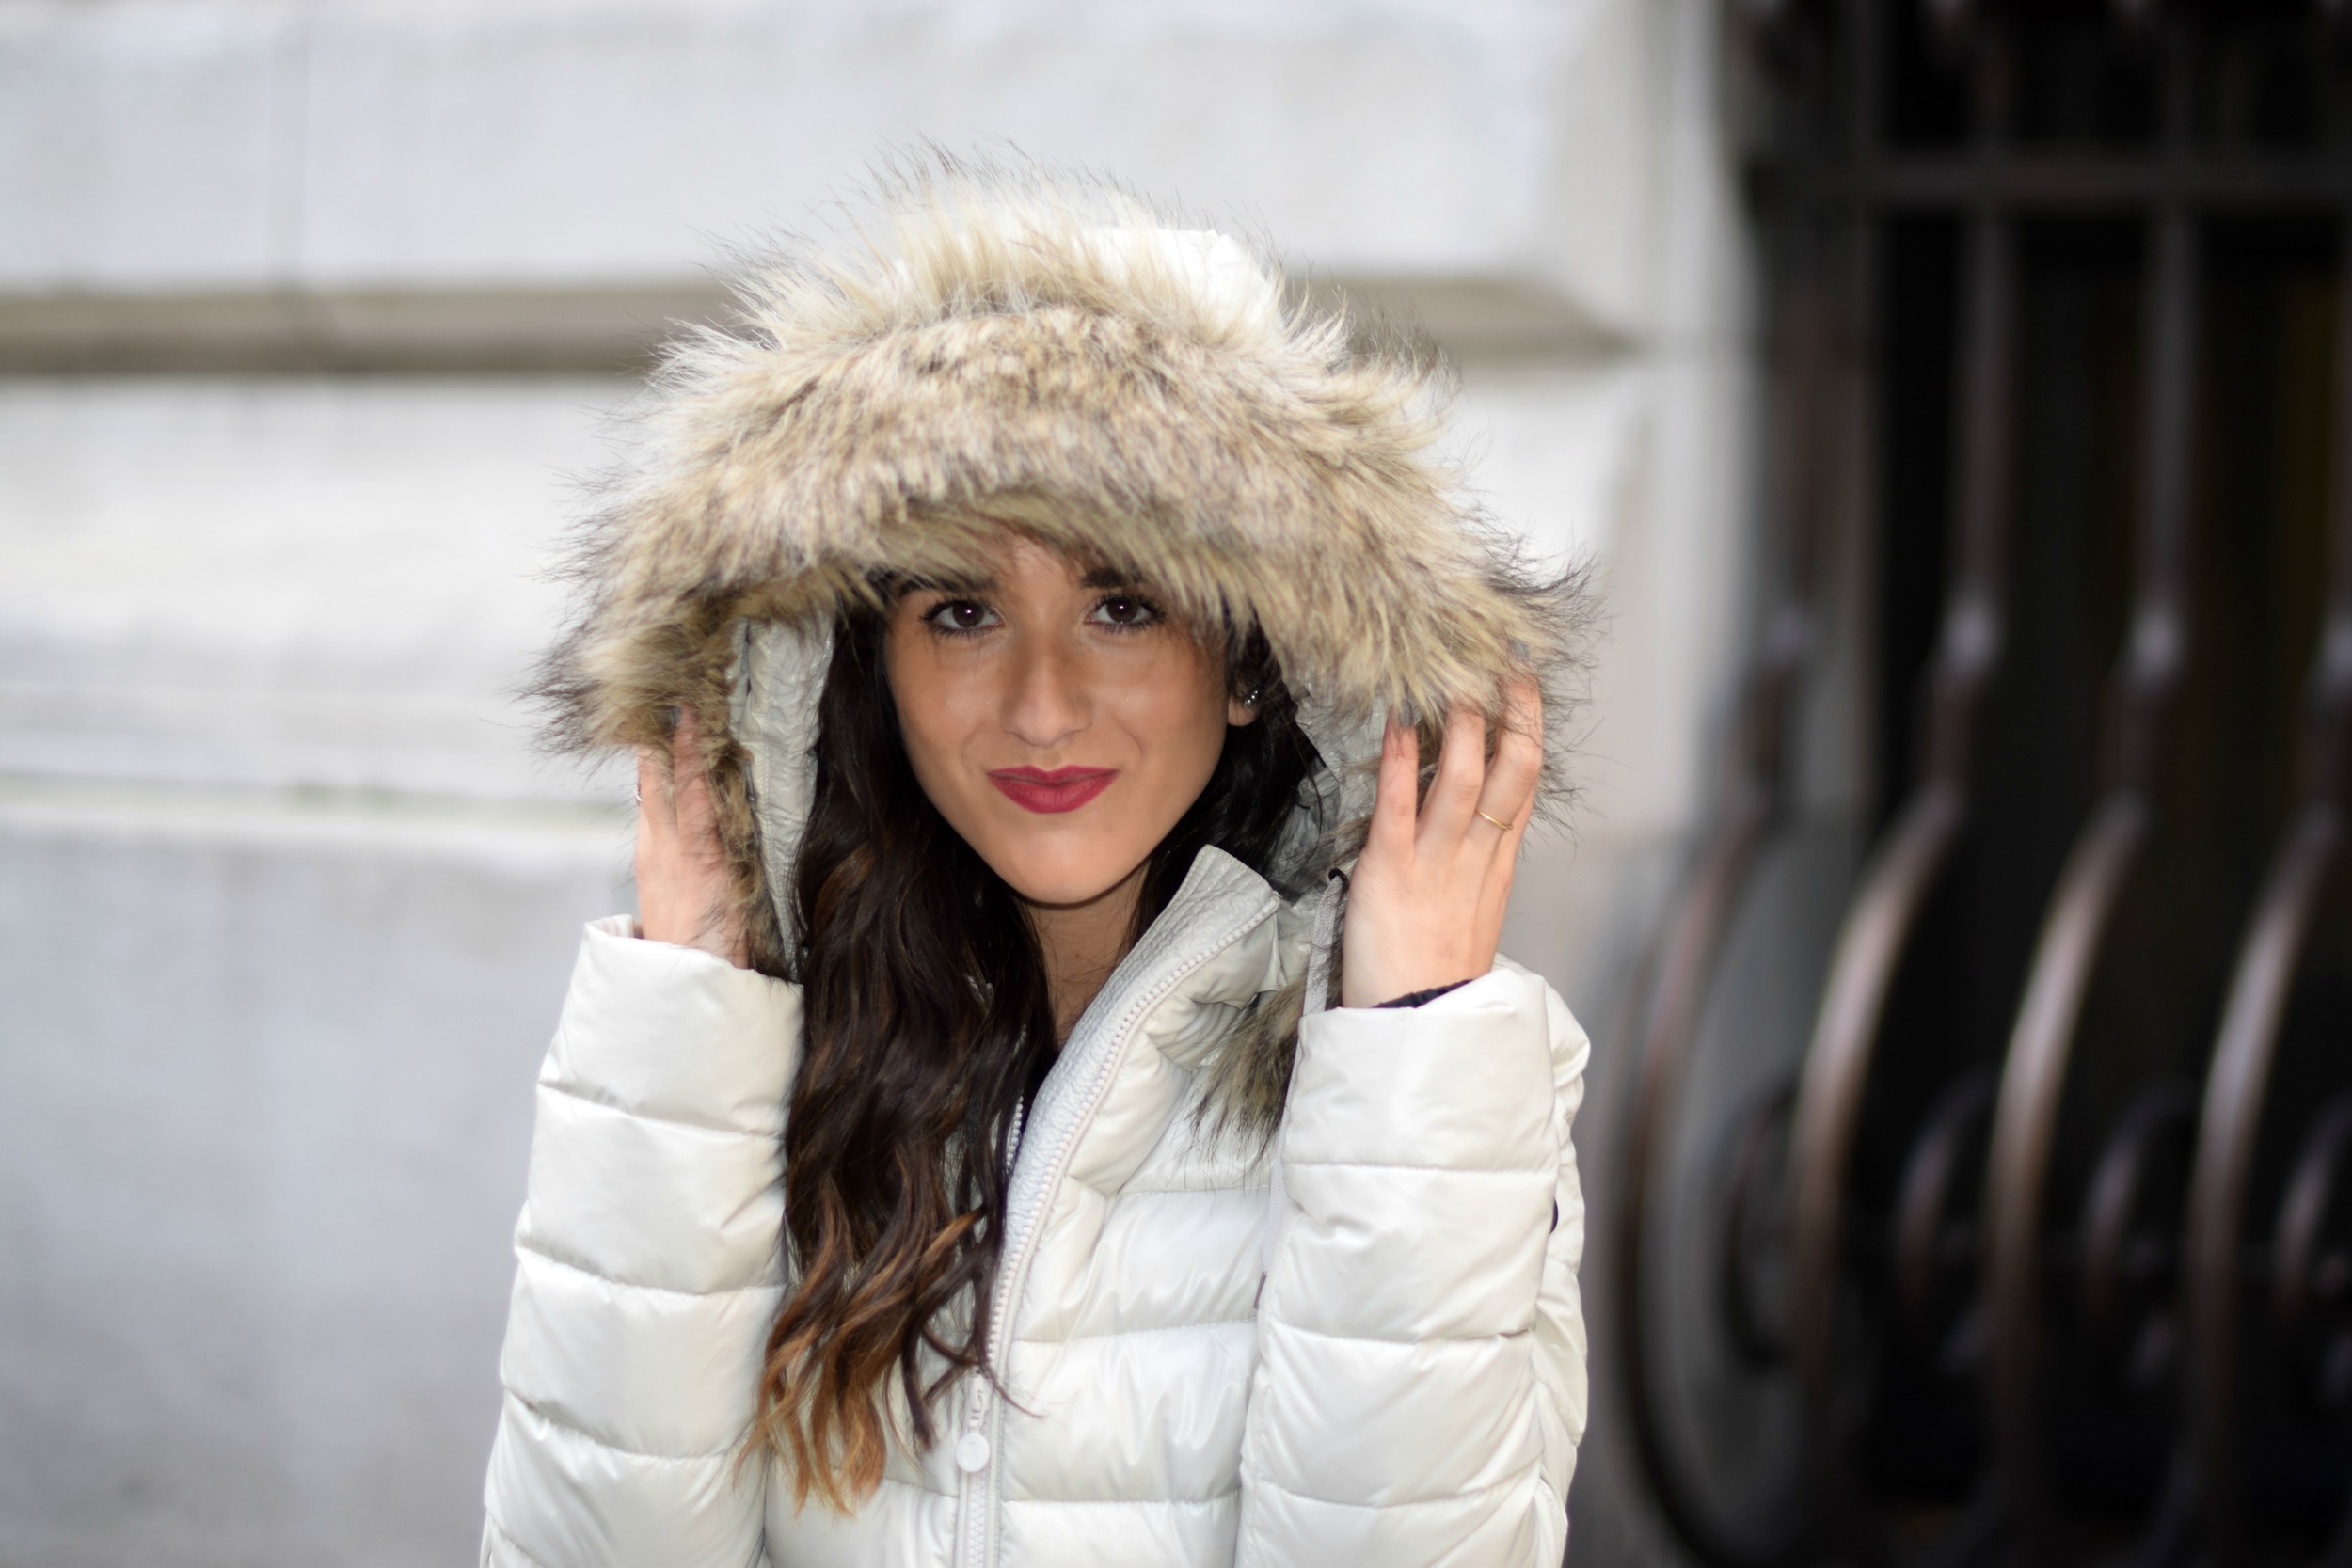 White Hi-Low Puffer Coat Snowman New York Louboutins & Love Fashion Blog Esther Santer NYC Street Style Blogger Puffer Premium Down Jacket Outerwear Company Collab Faux-Fur Hood Winter Beautiful Warm White Rings Photoshoot Model Discount Code Shopping.JPG